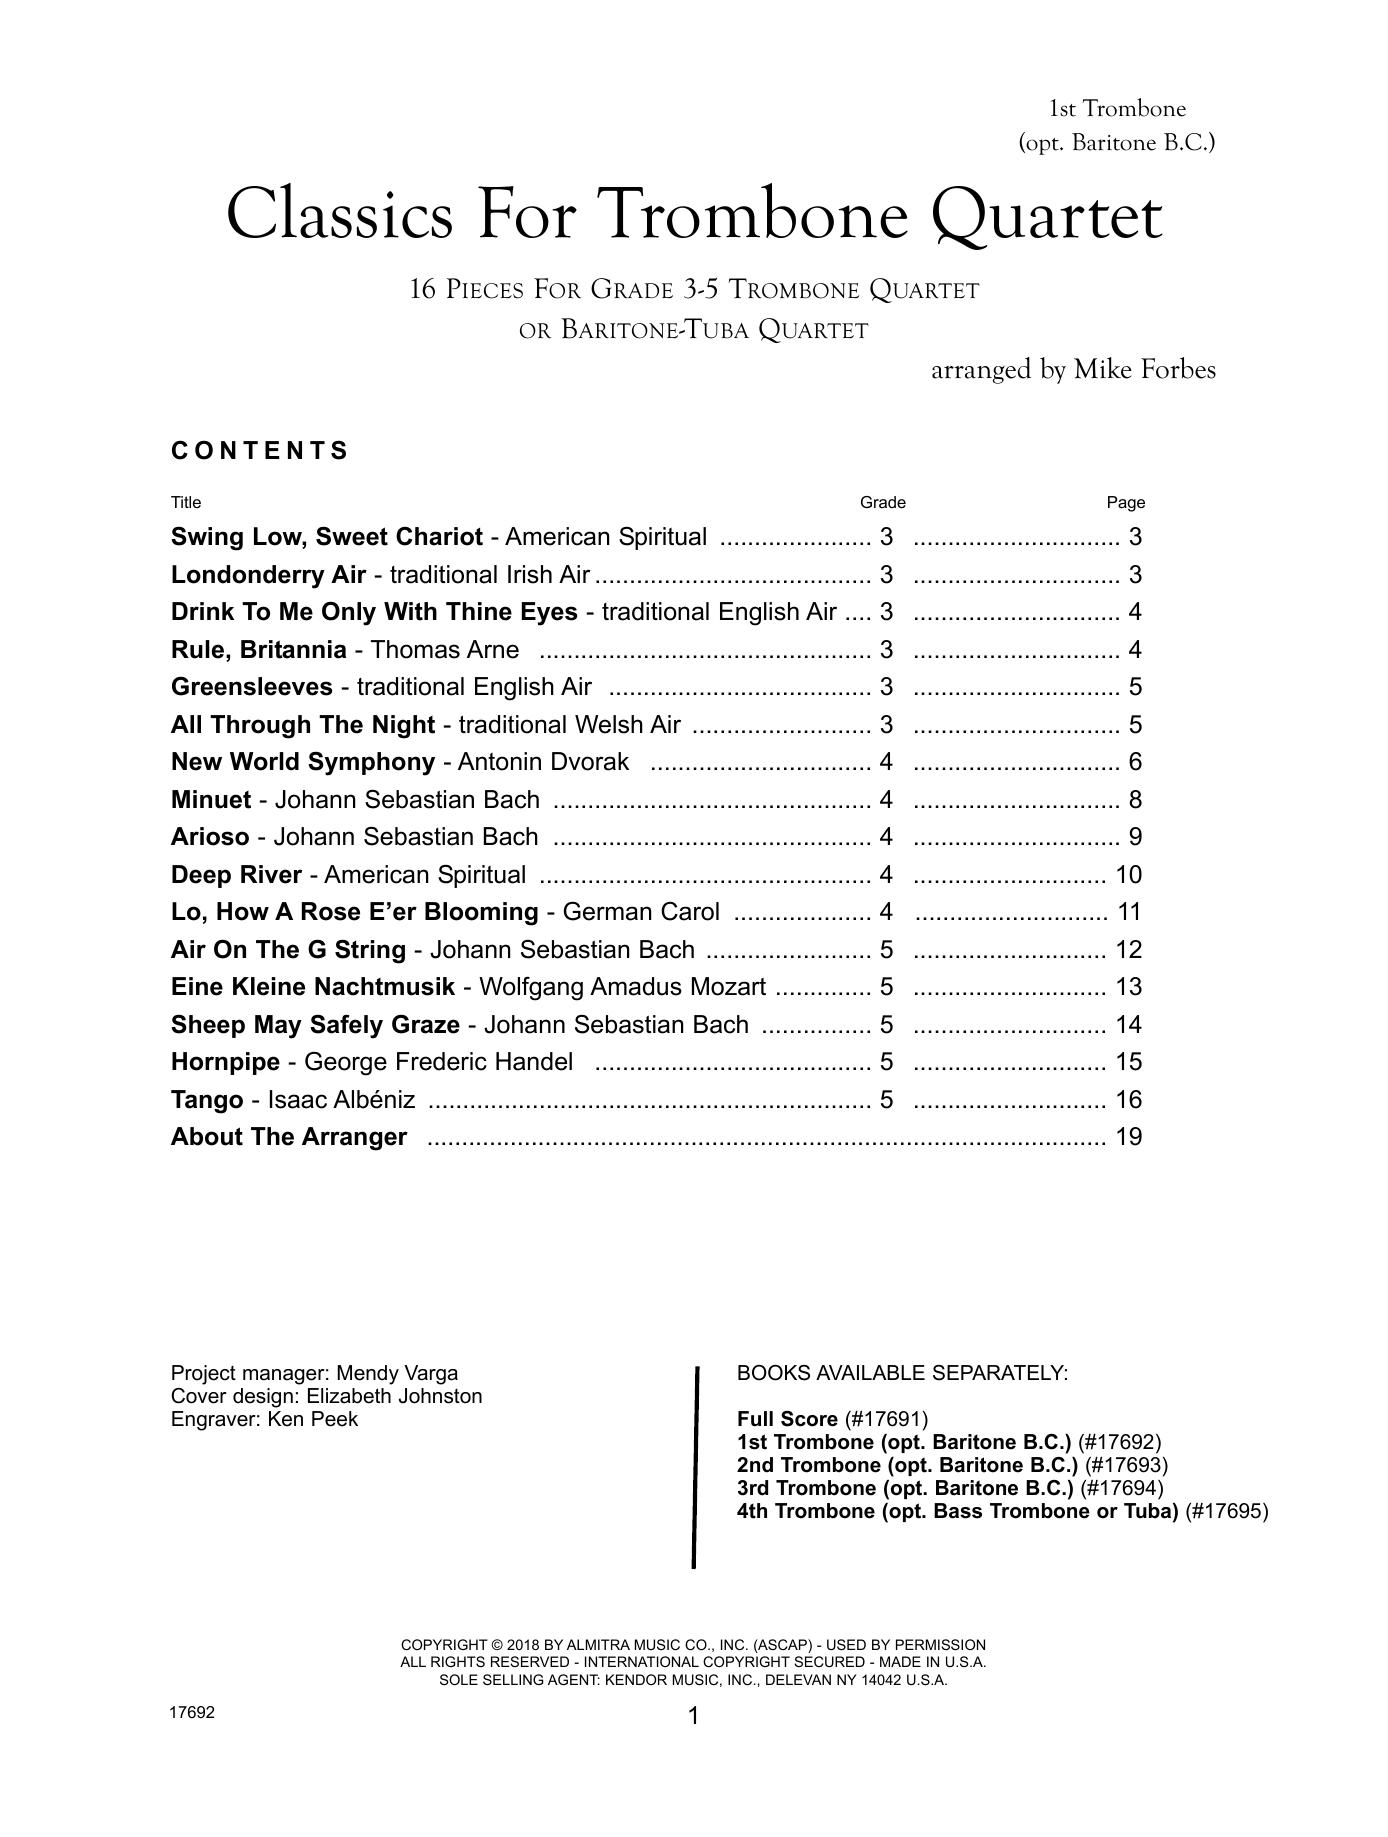 Download Mike Forbes Classics For Trombone Quartet - 1st Tro Sheet Music